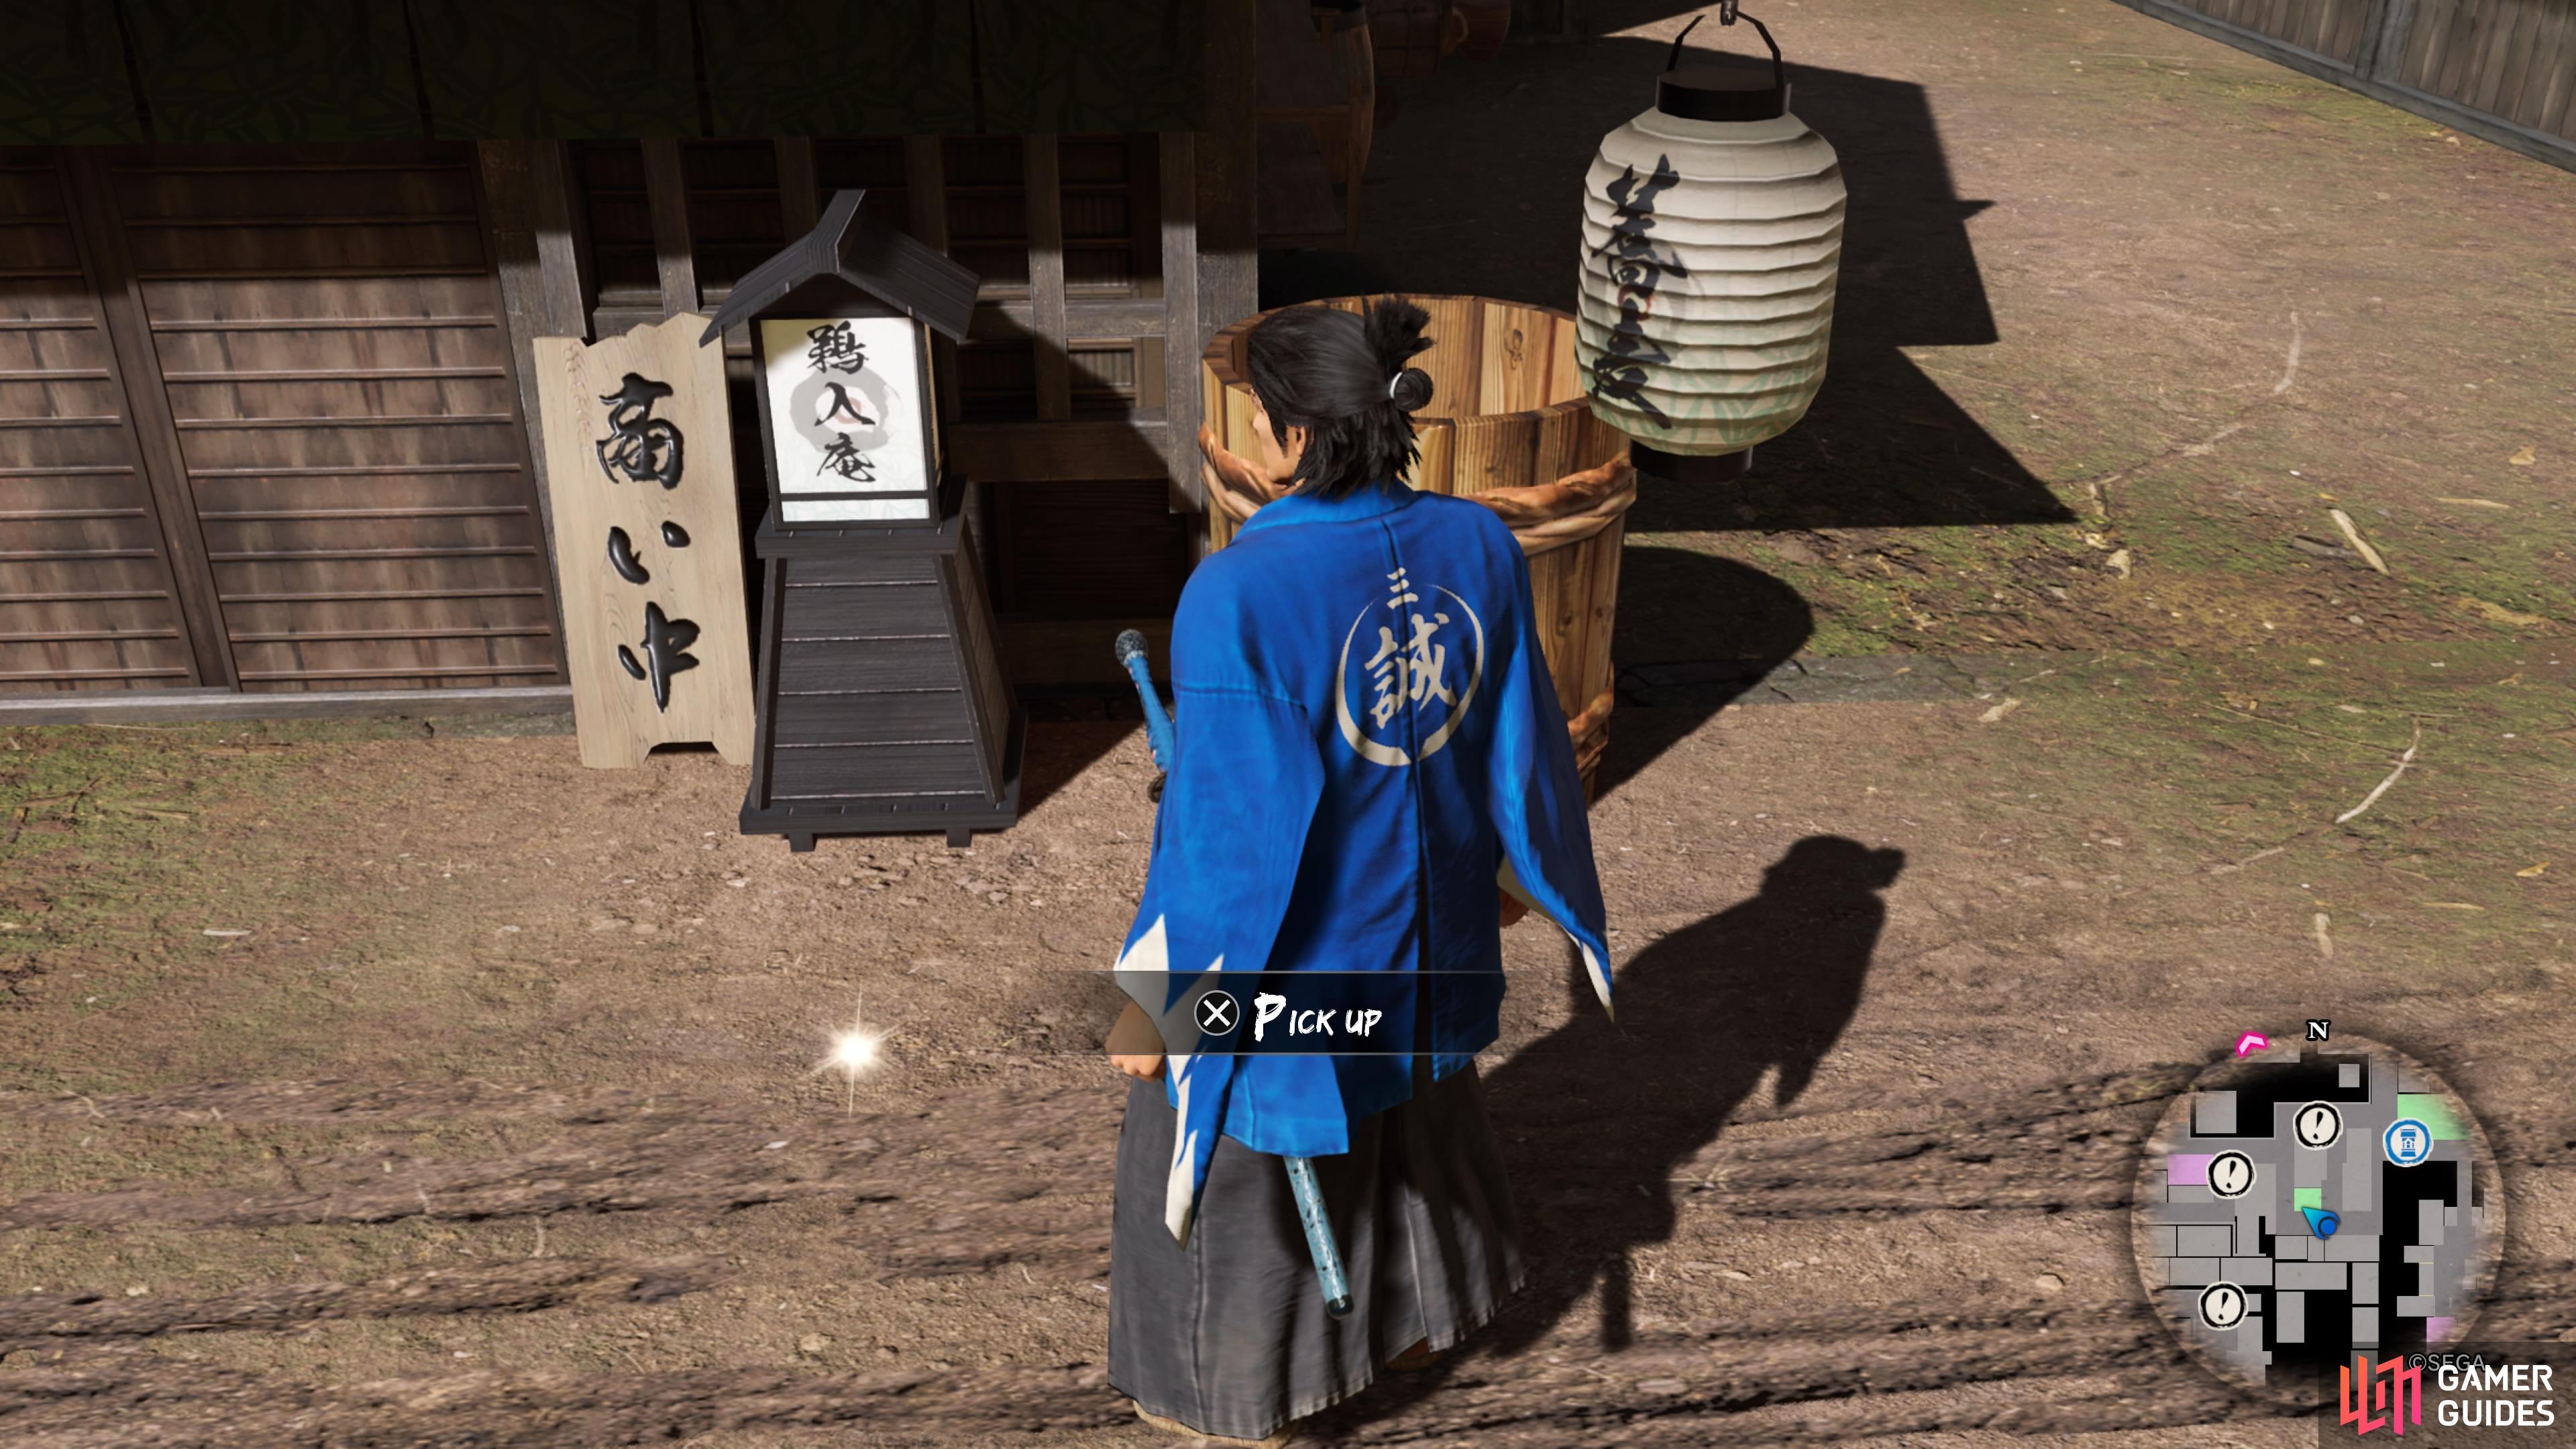 It's found right outside of the Gunman dojo, once you have access to it